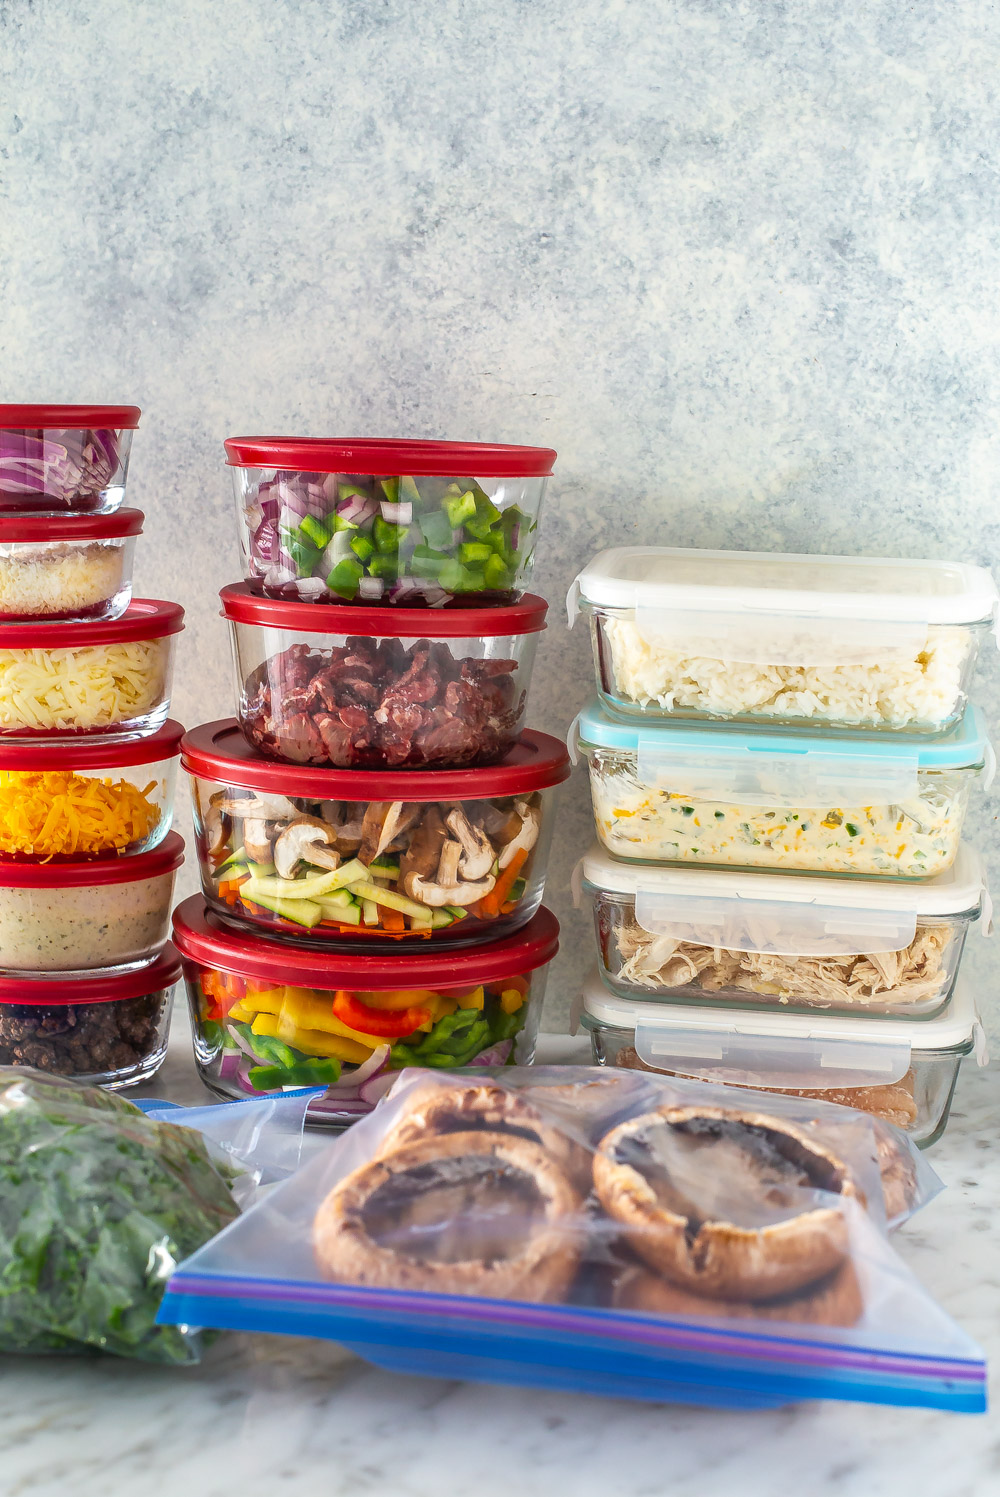 Several prepped ingredients in glass containers and Ziploc bags.